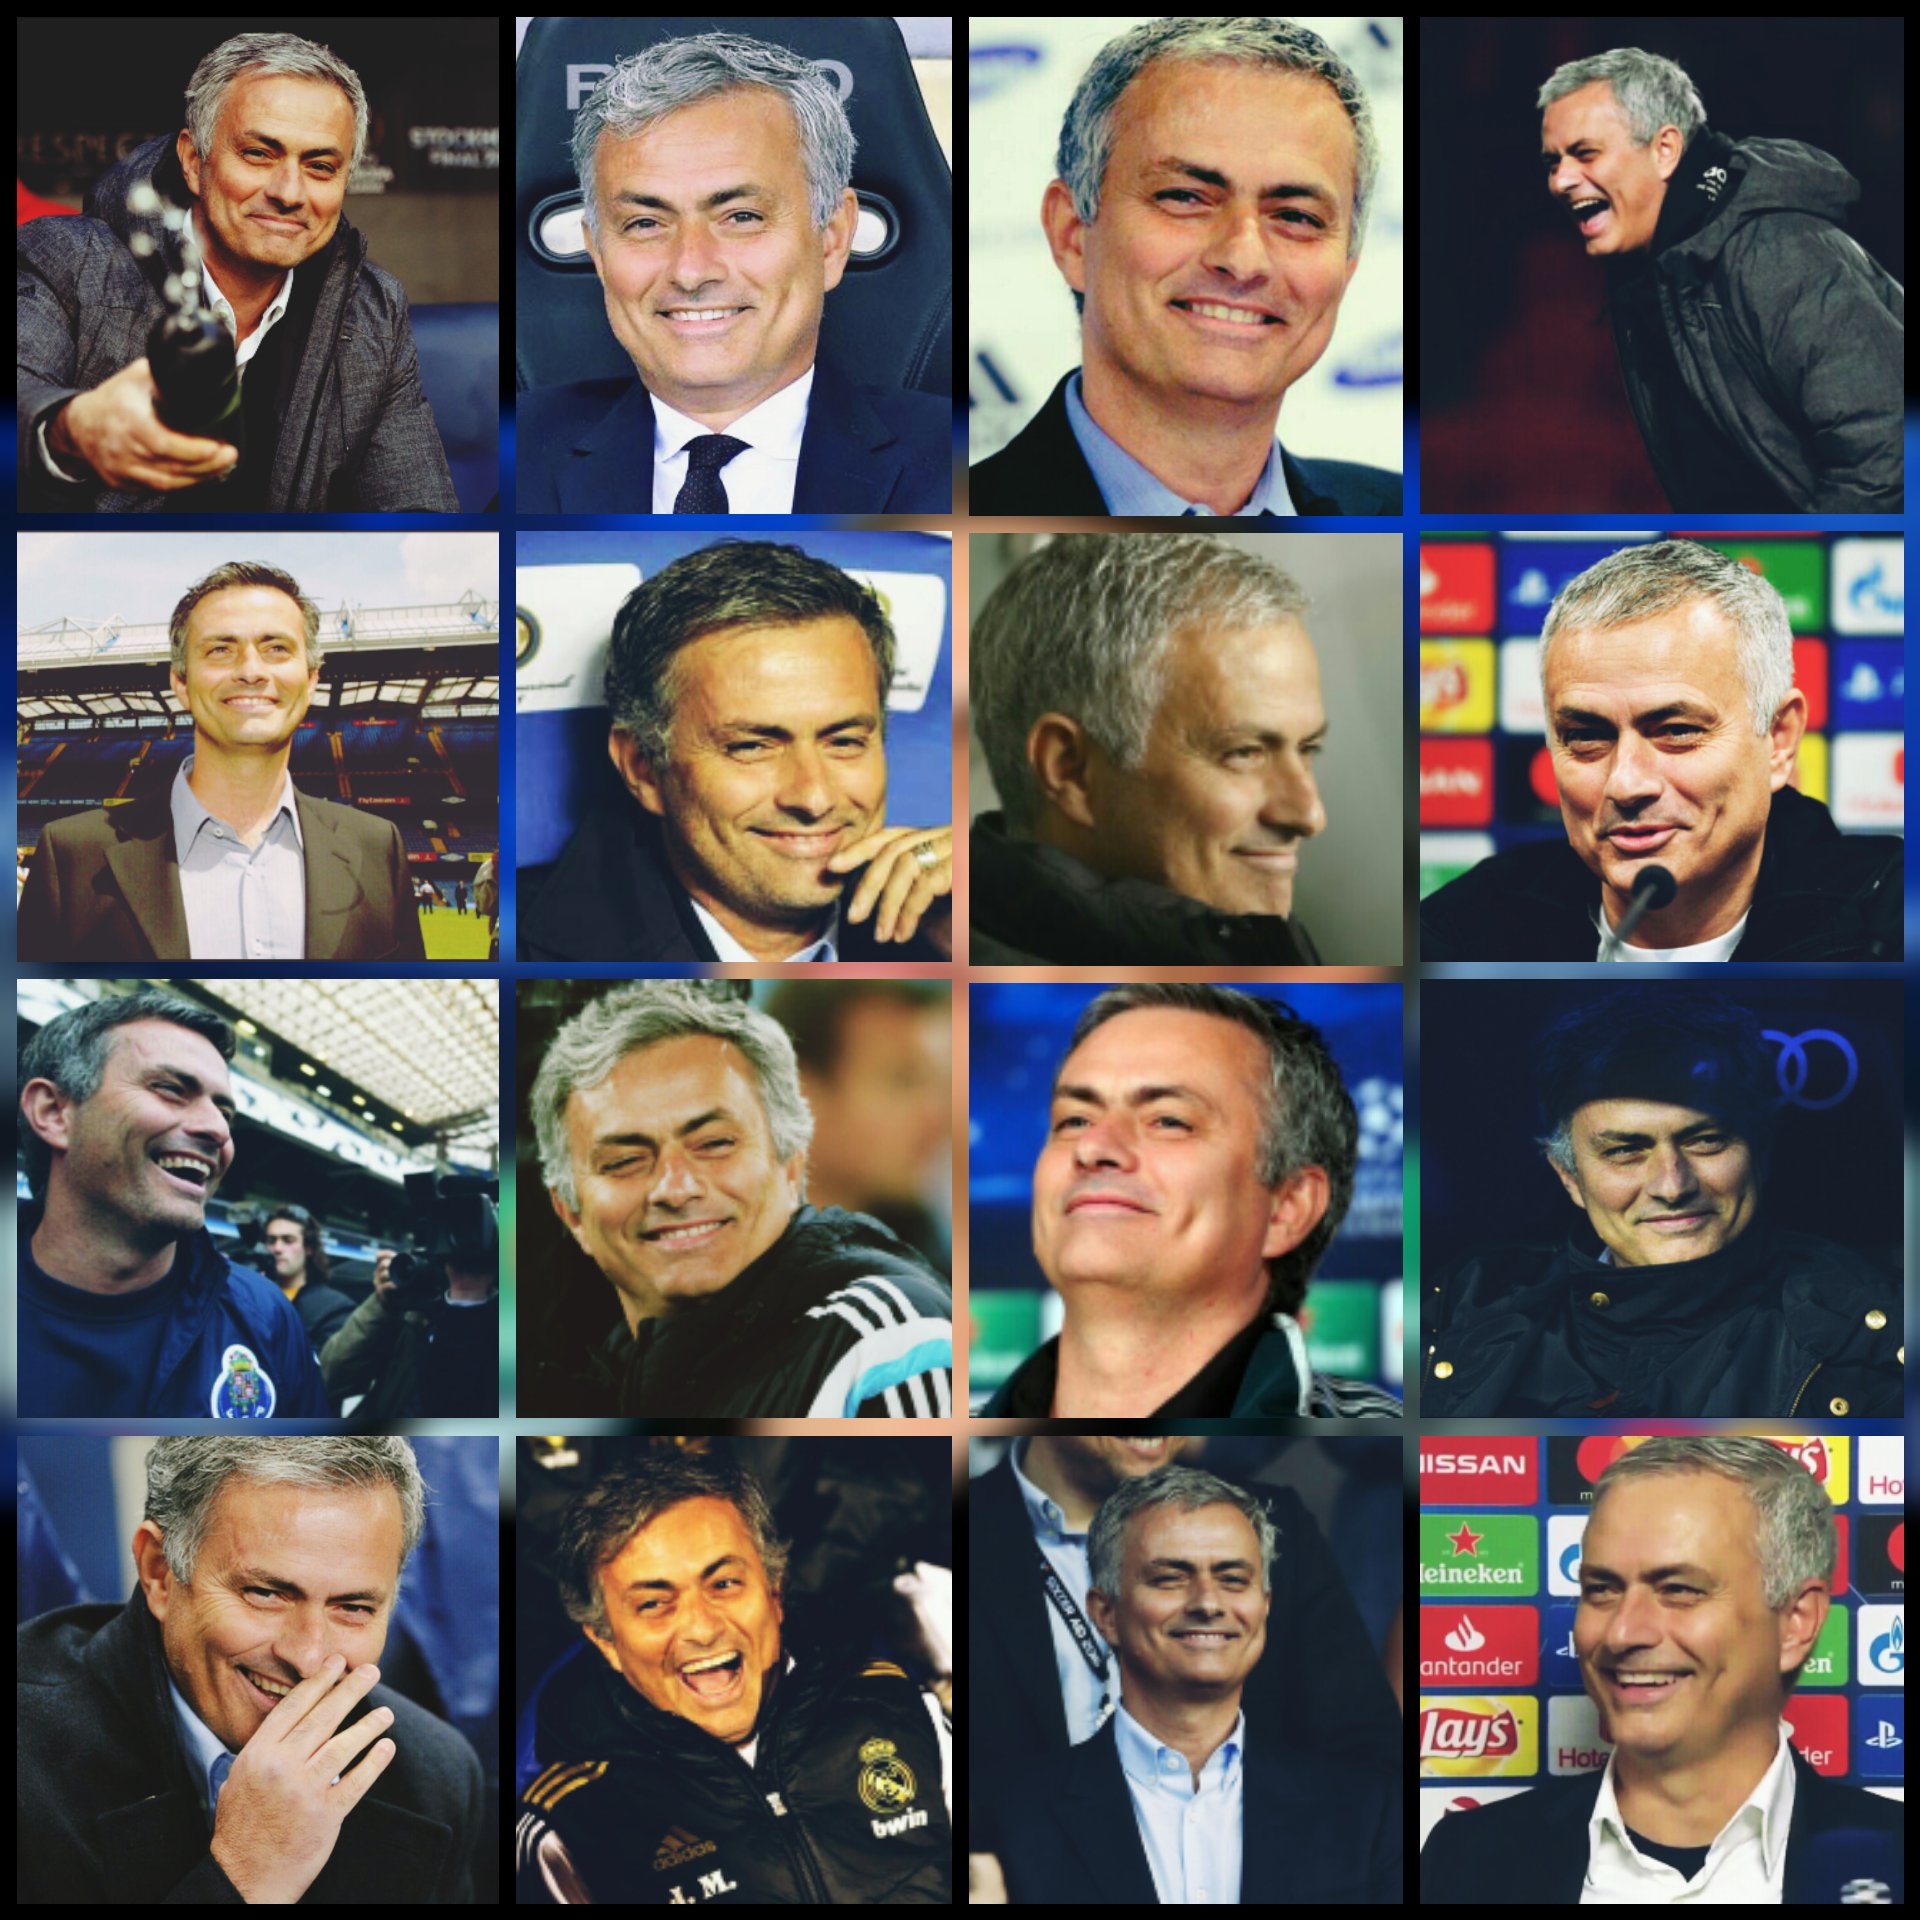 Happy 56th Birthday to Jose Mourinho the best manager I have ever seen

May the smile never leaves his face 